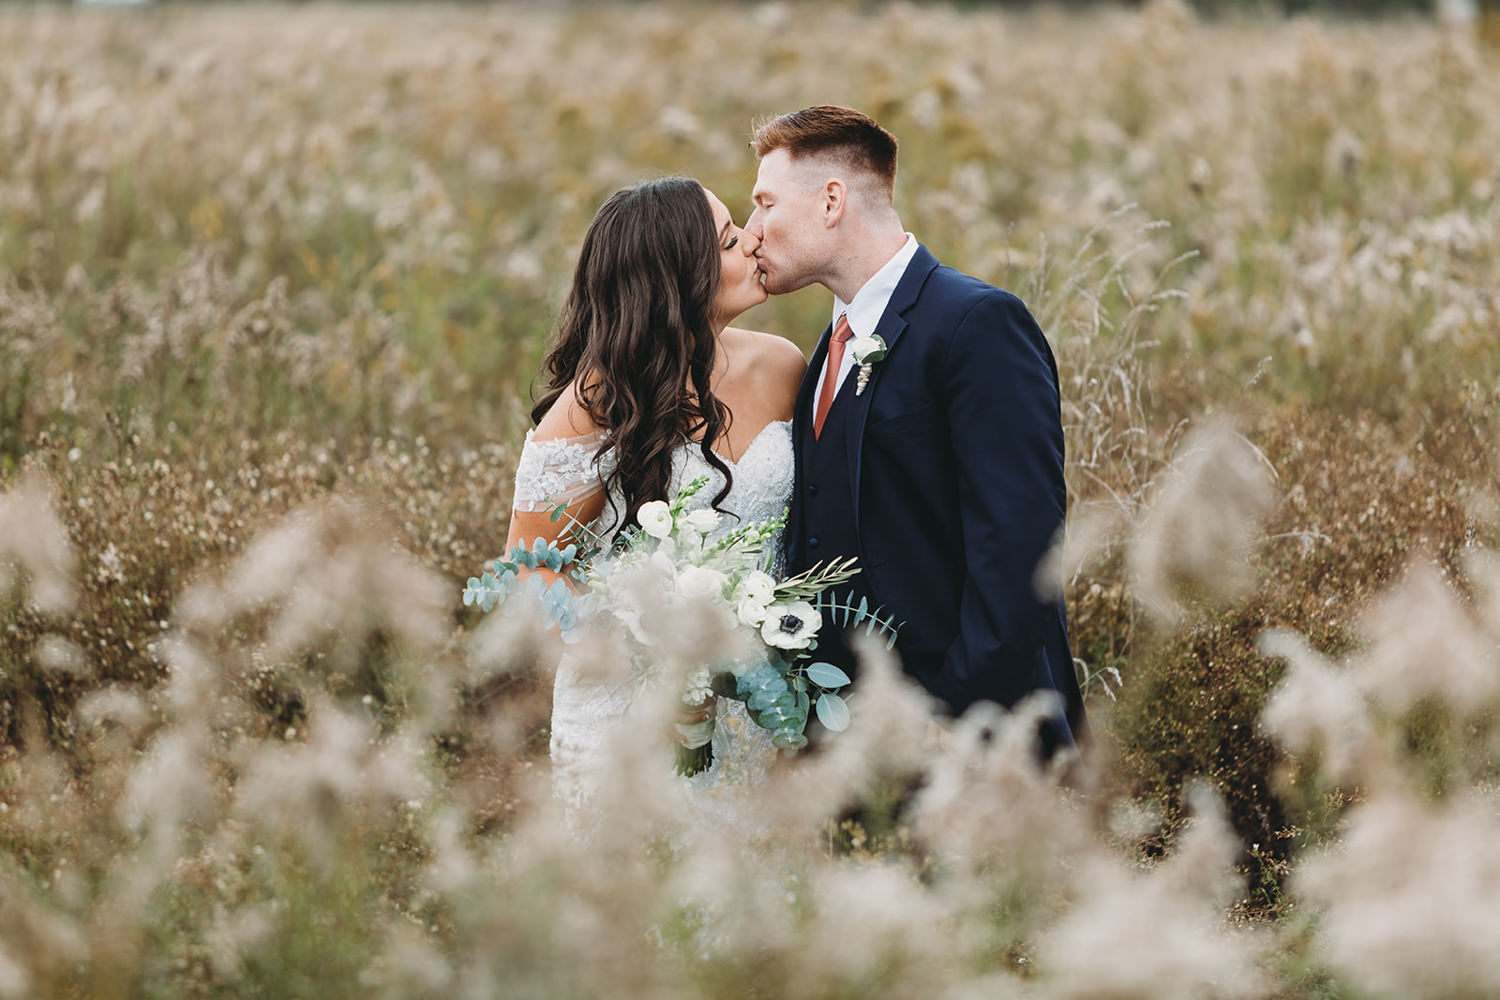 man in suit and woman in white dress with lace kiss in the middle of a field of wildflowers during this White Willow Farms Wedding